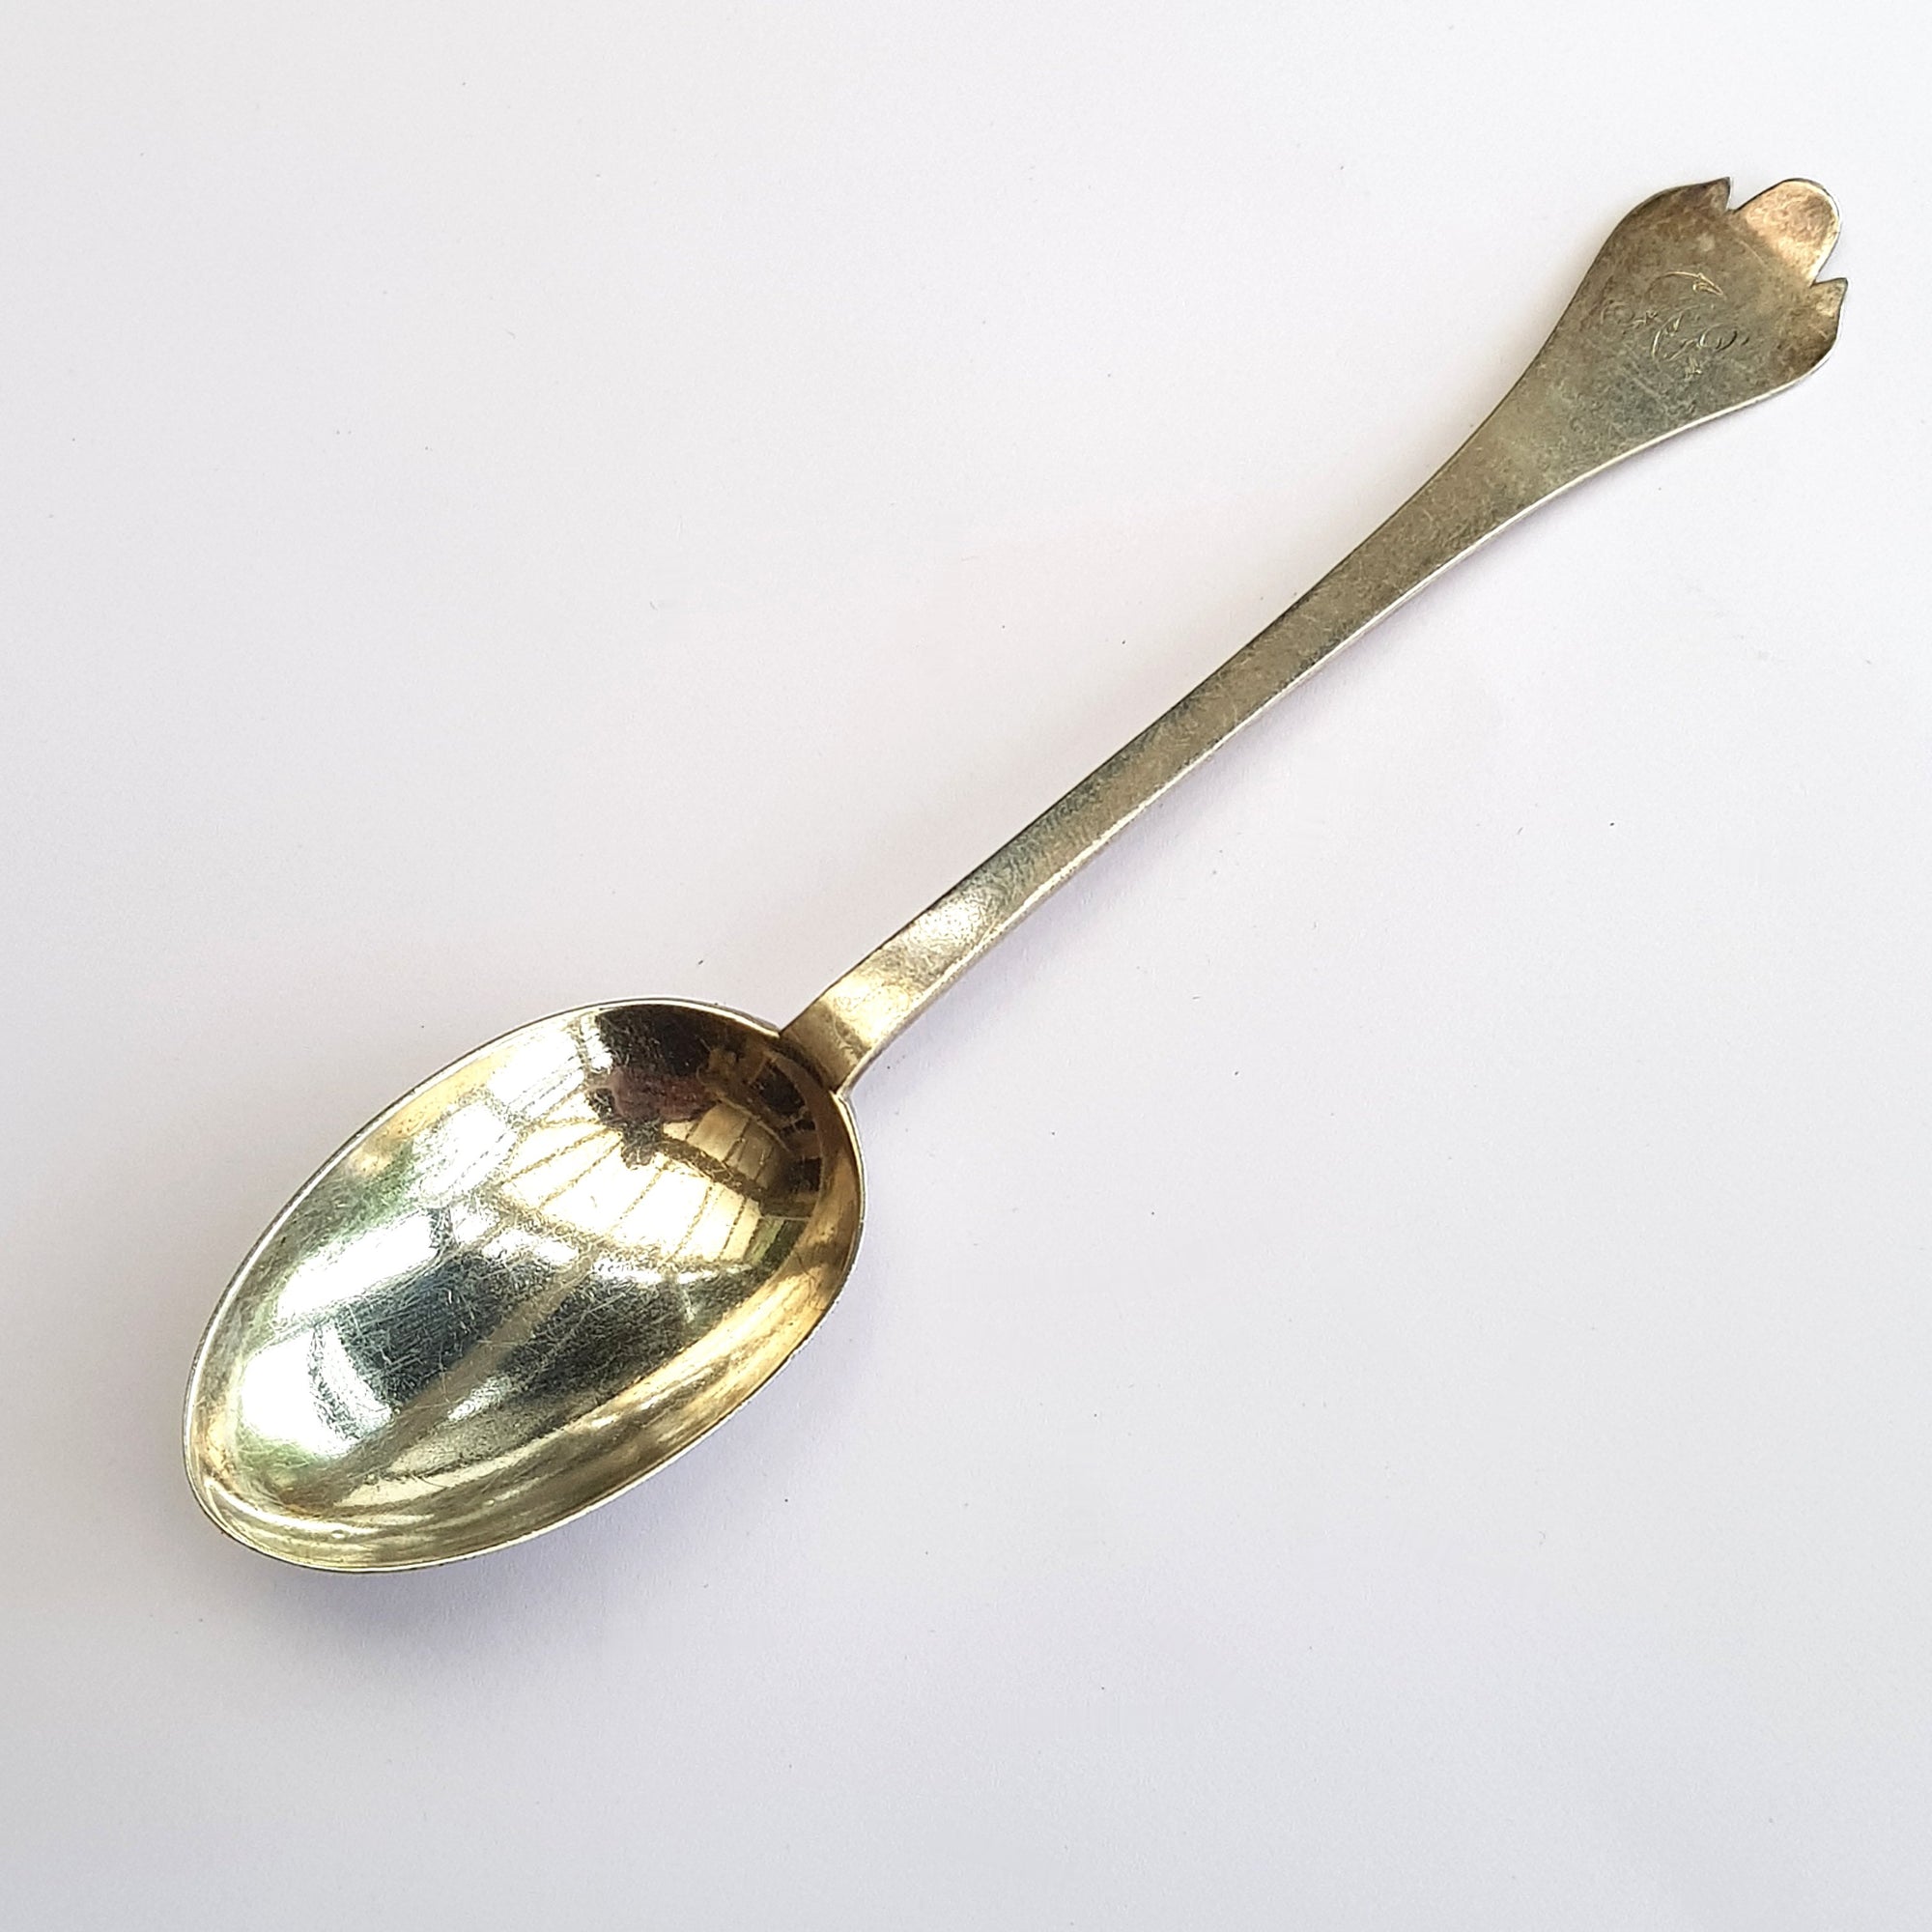 Rare English Sterling Silver Low Mark Dog Nose Pudding Spoon Monogram Engraved Antique London Circa 1892